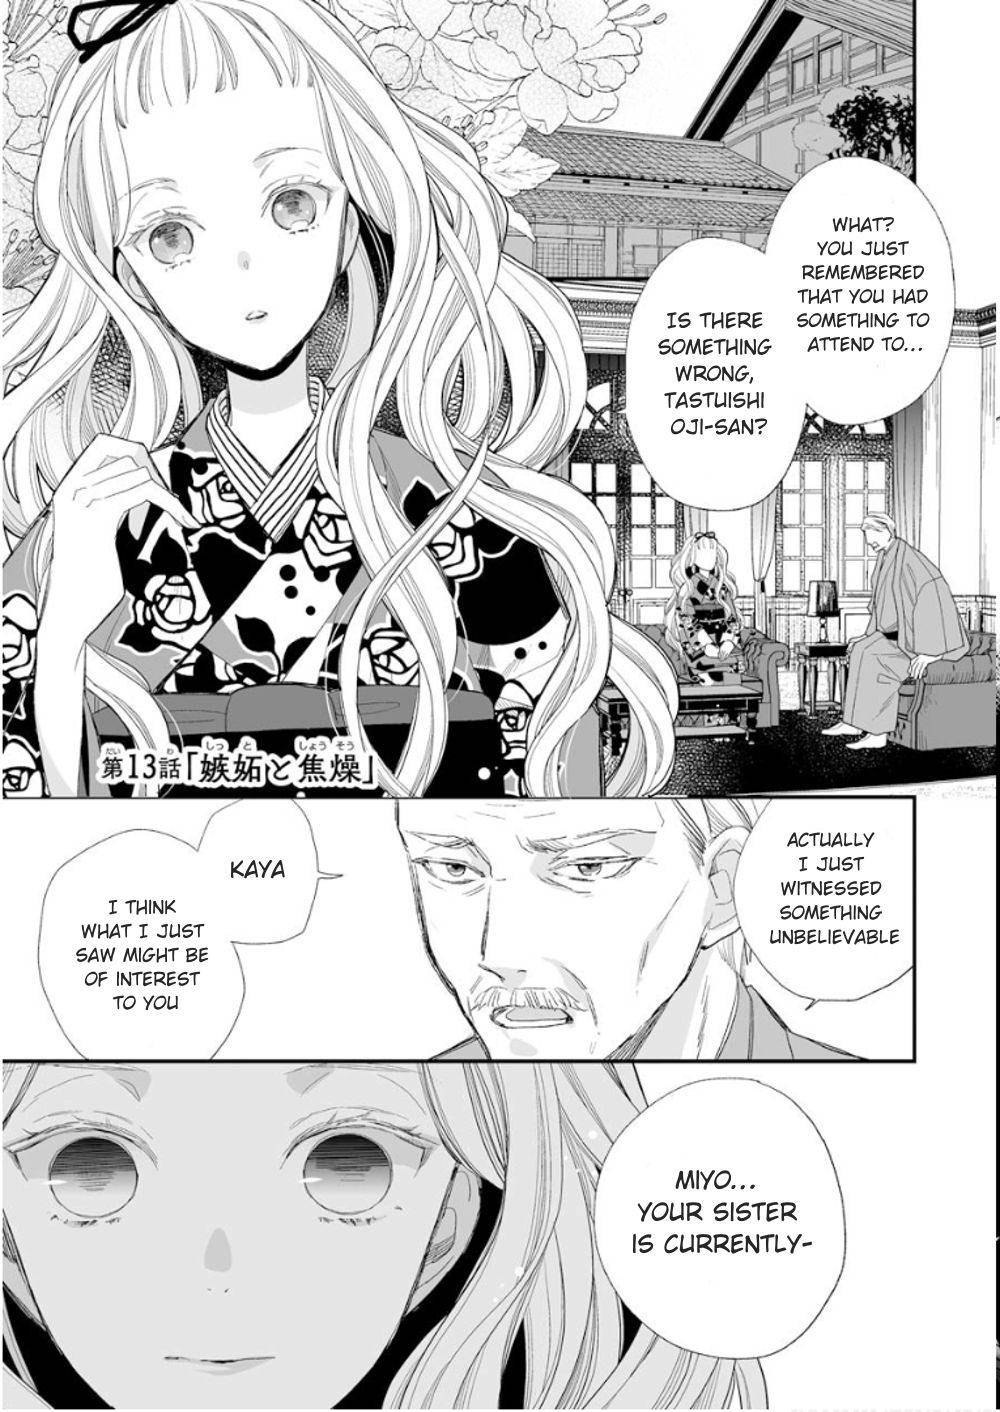 My Blissful Marriage Vol.2 Chapter 13: Jealousy And Impatience - Picture 1